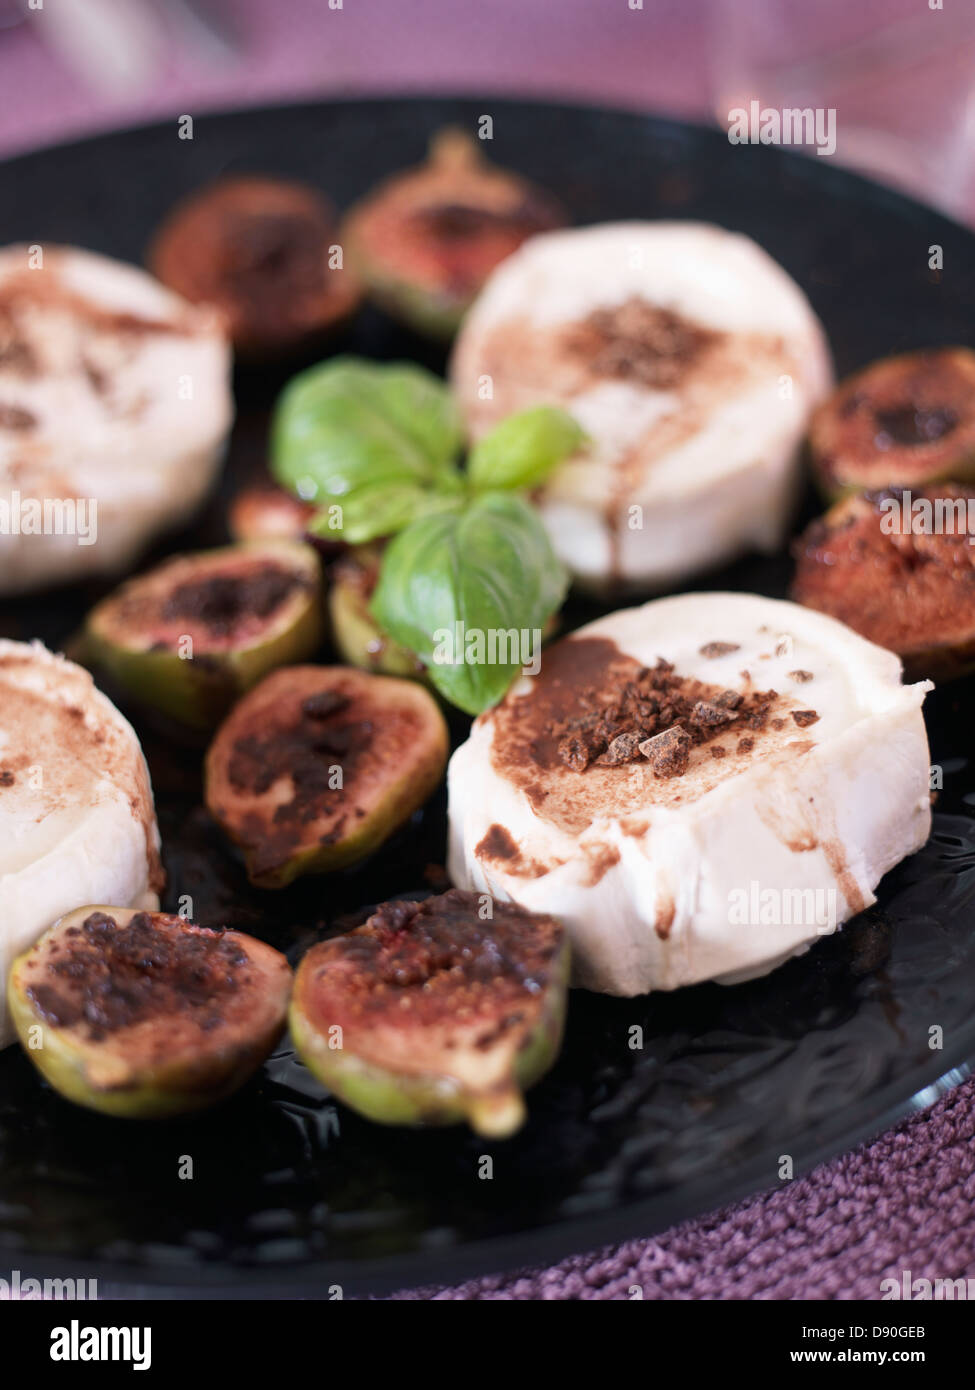 Figs and cheese served as appetisers Stock Photo